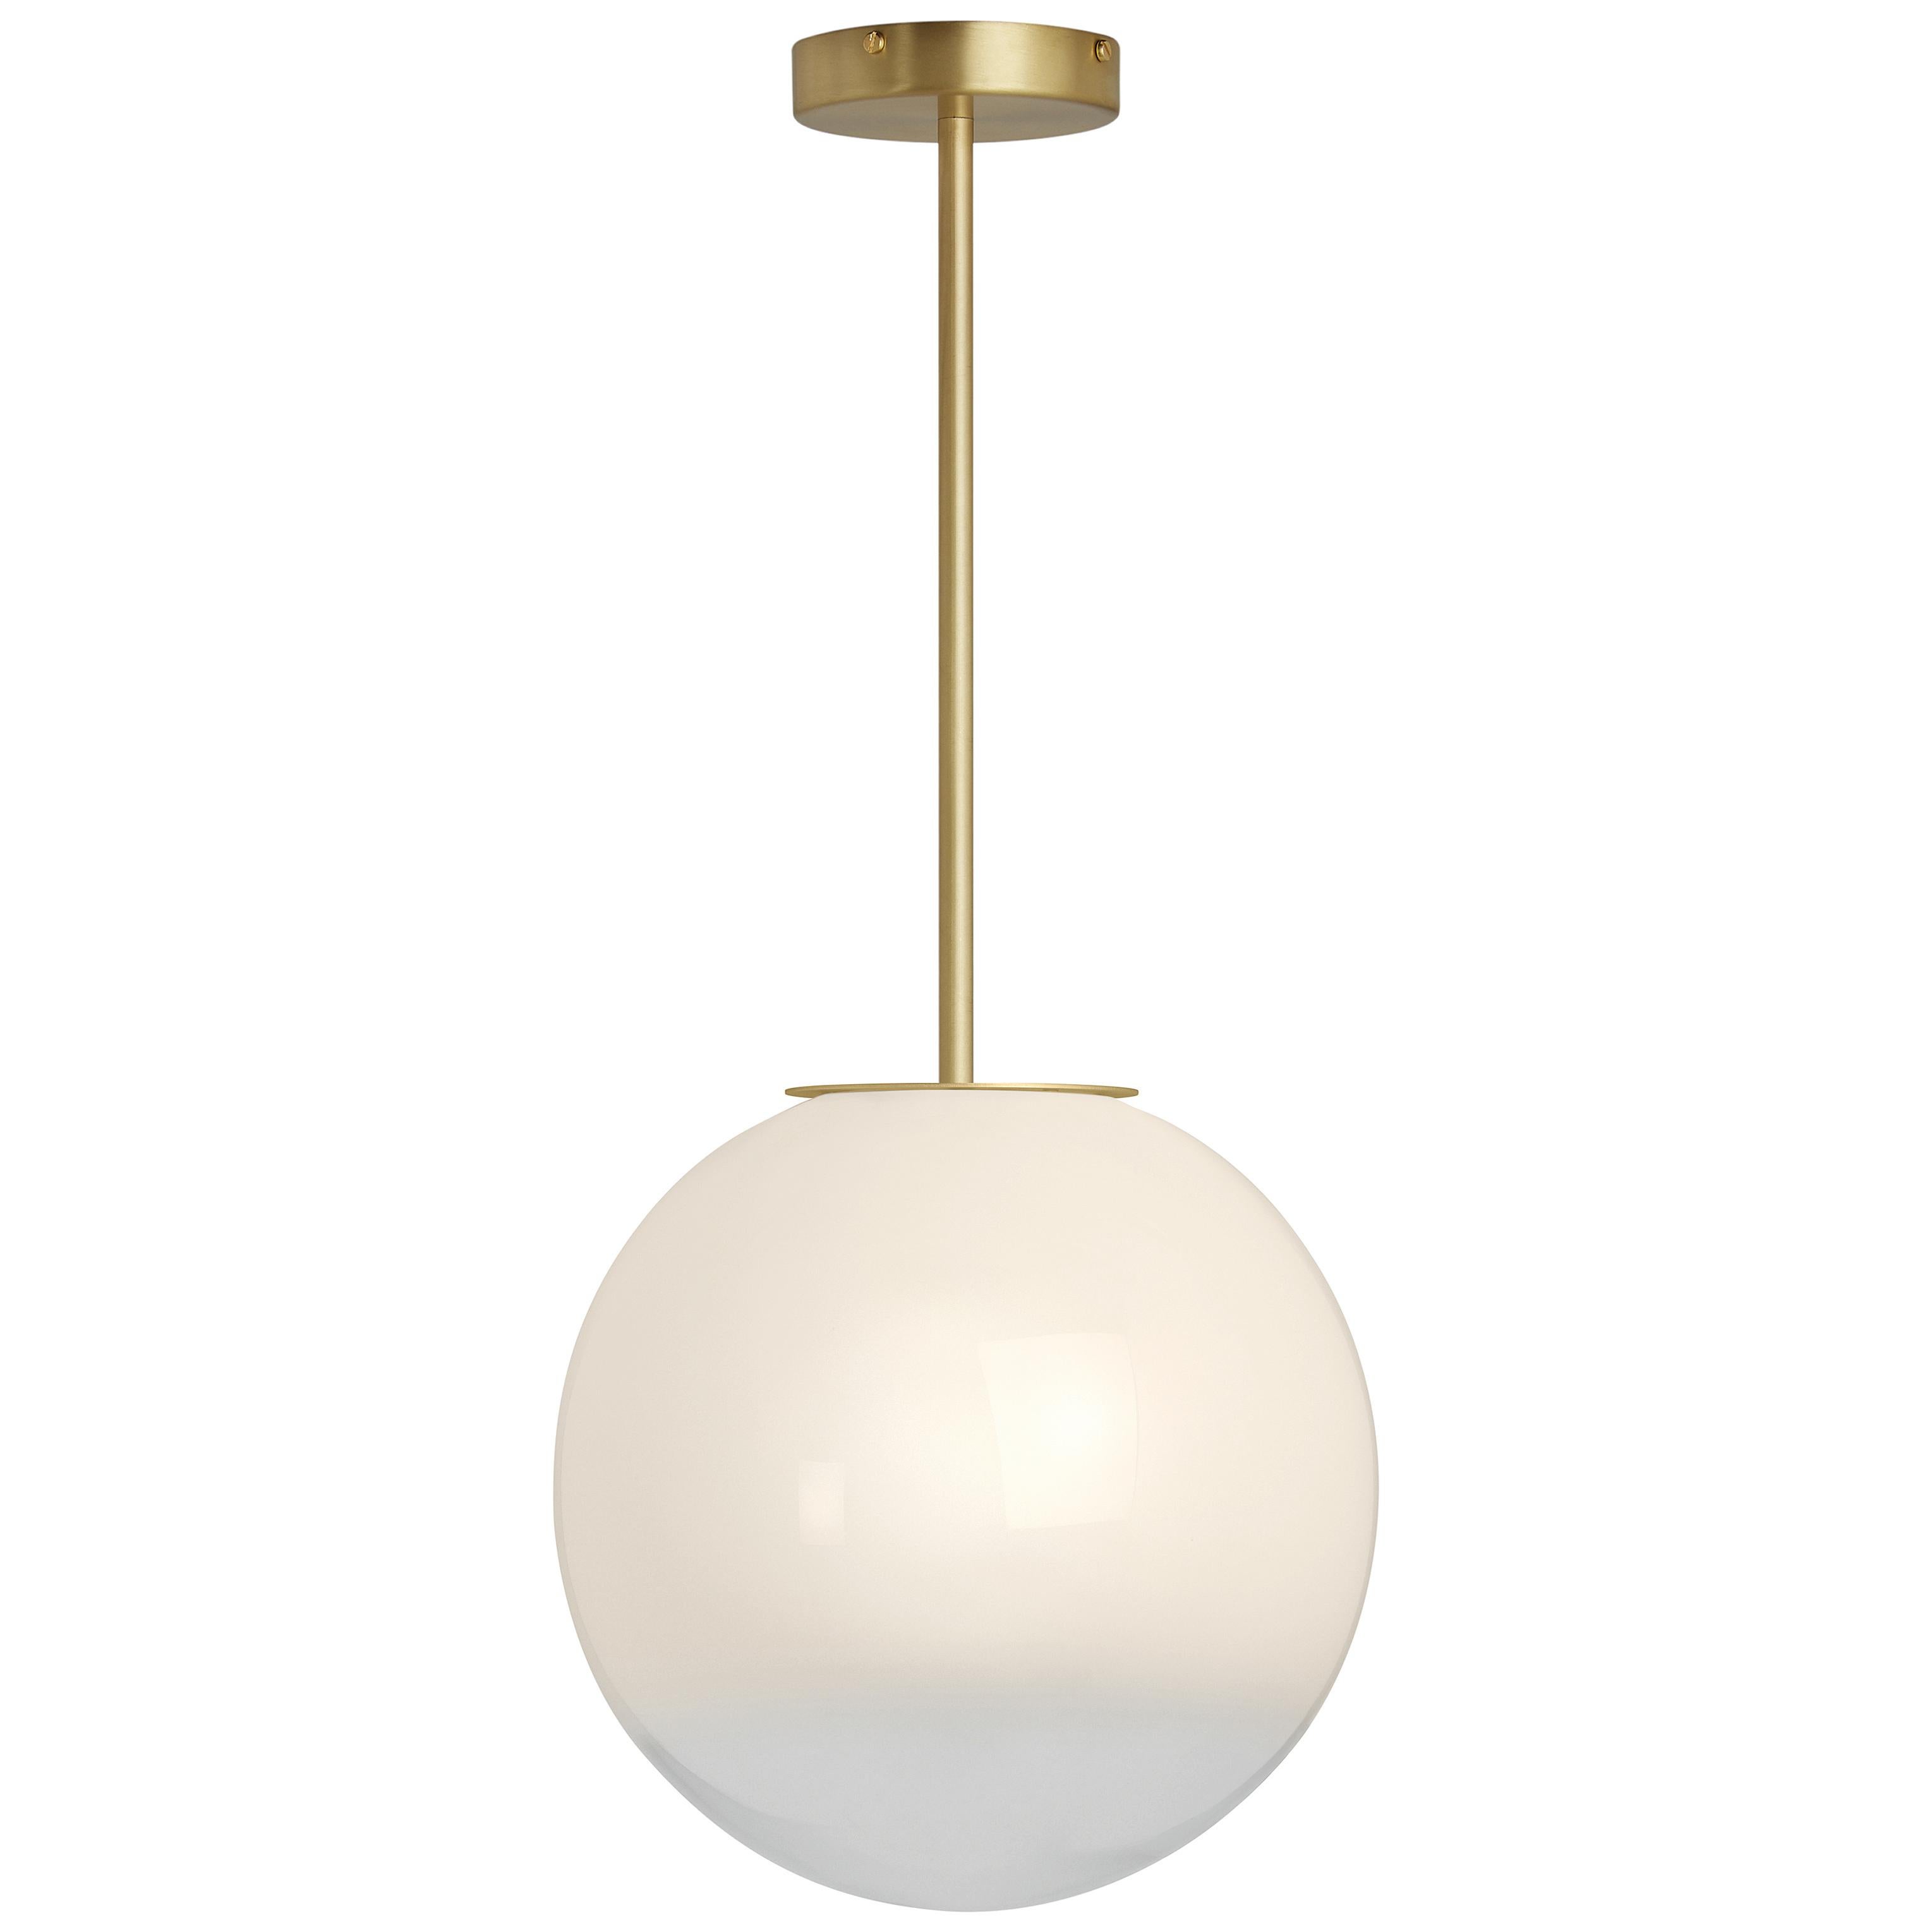 Skye small pendant by CTO Lighting
Materials: satin brass with sfumato glass shade
Also available in dark bronze with sfumato glass shade
Dimensions: H 29.5 x W 30 cm 

All our lamps can be wired according to each country. If sold to the USA it will